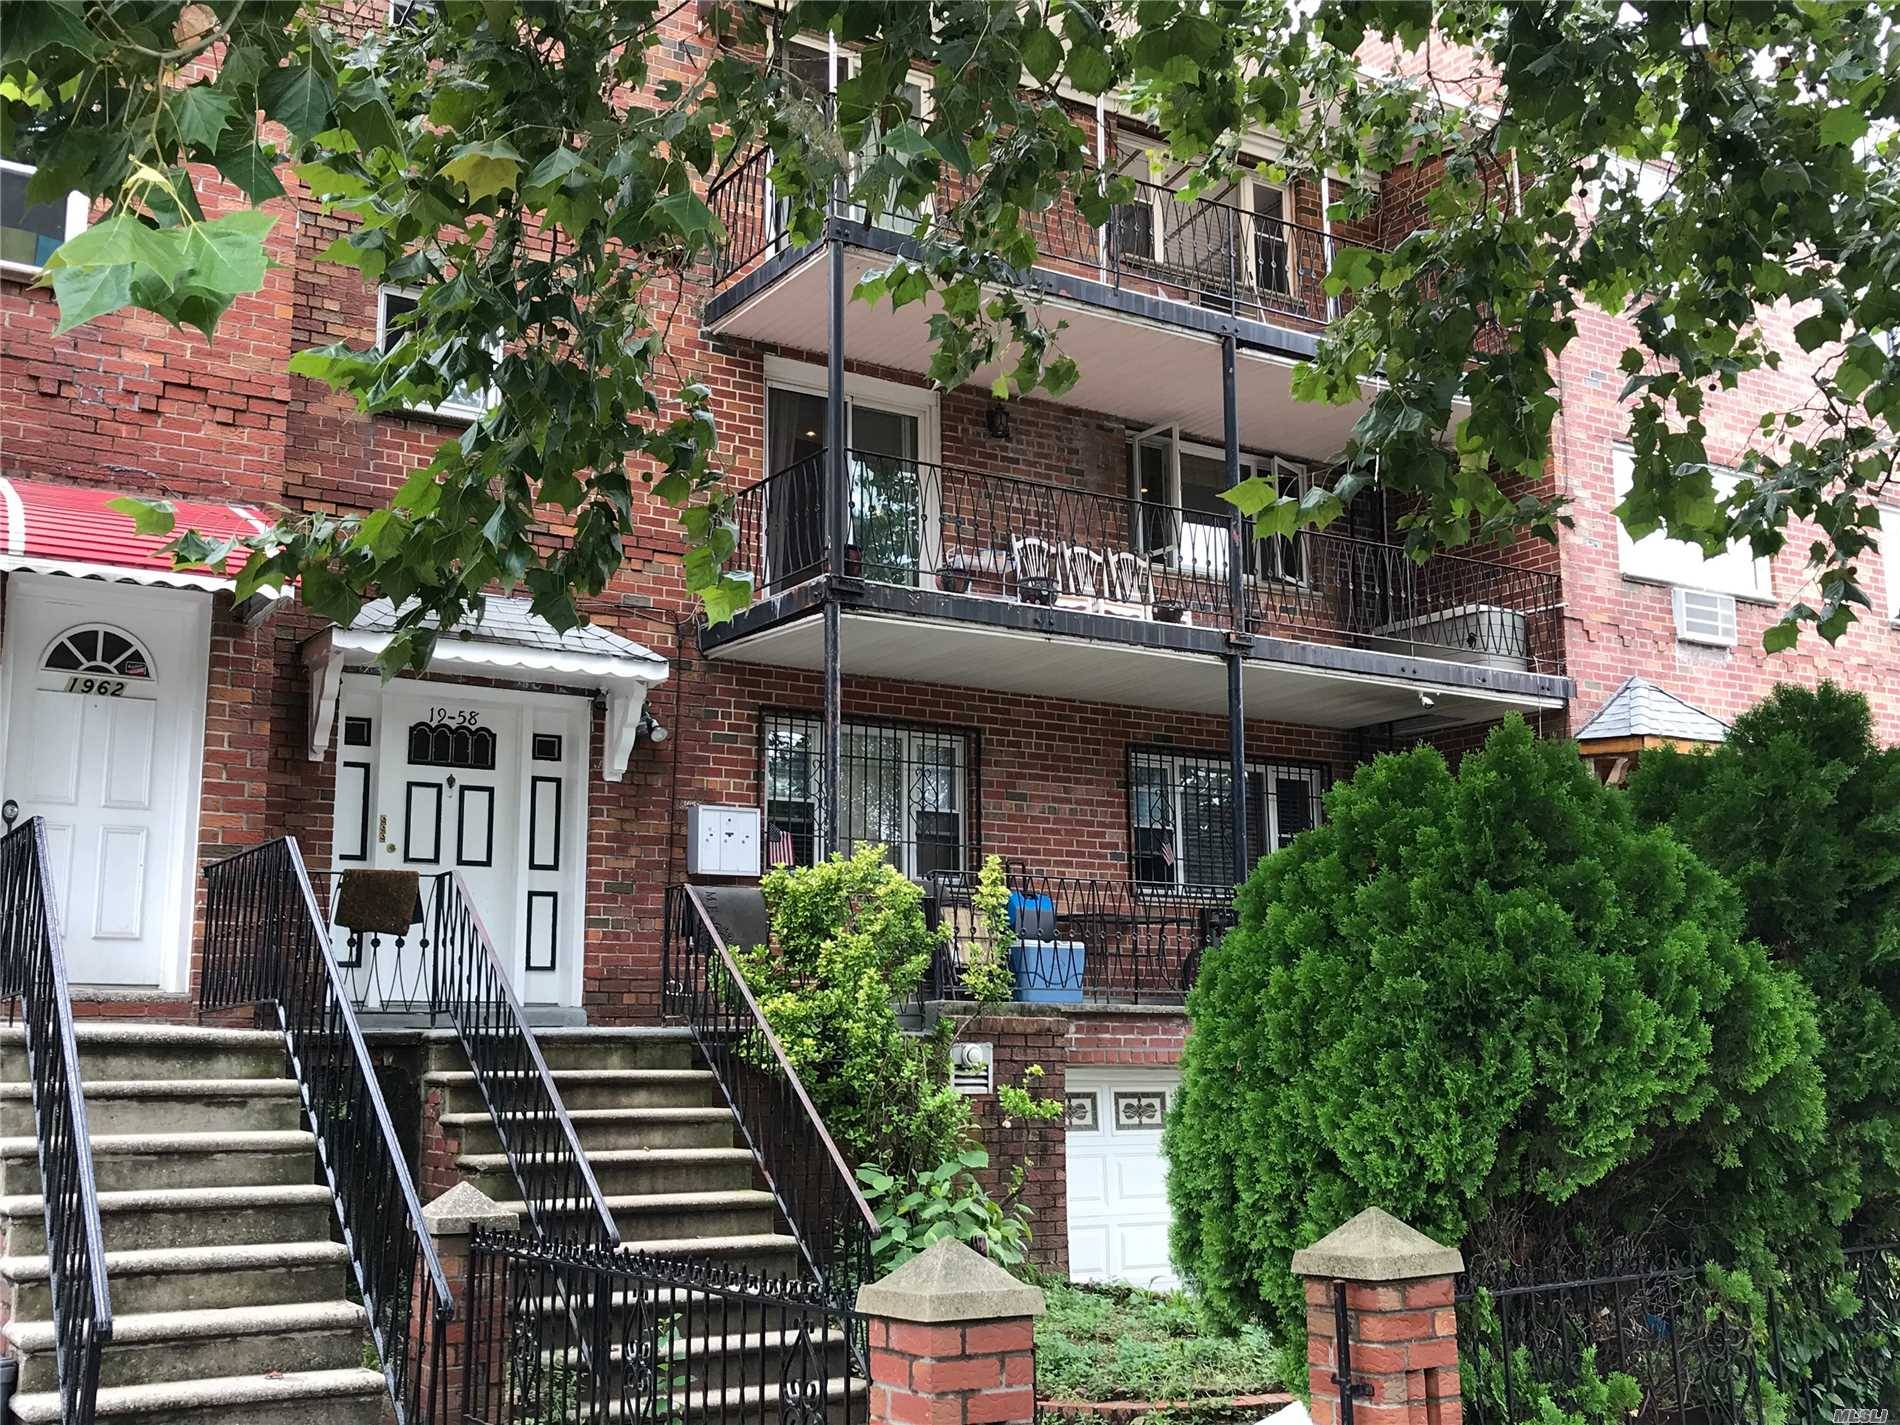 78th 9 BR Multi-Family Ditmars-Steinway LIC / Queens